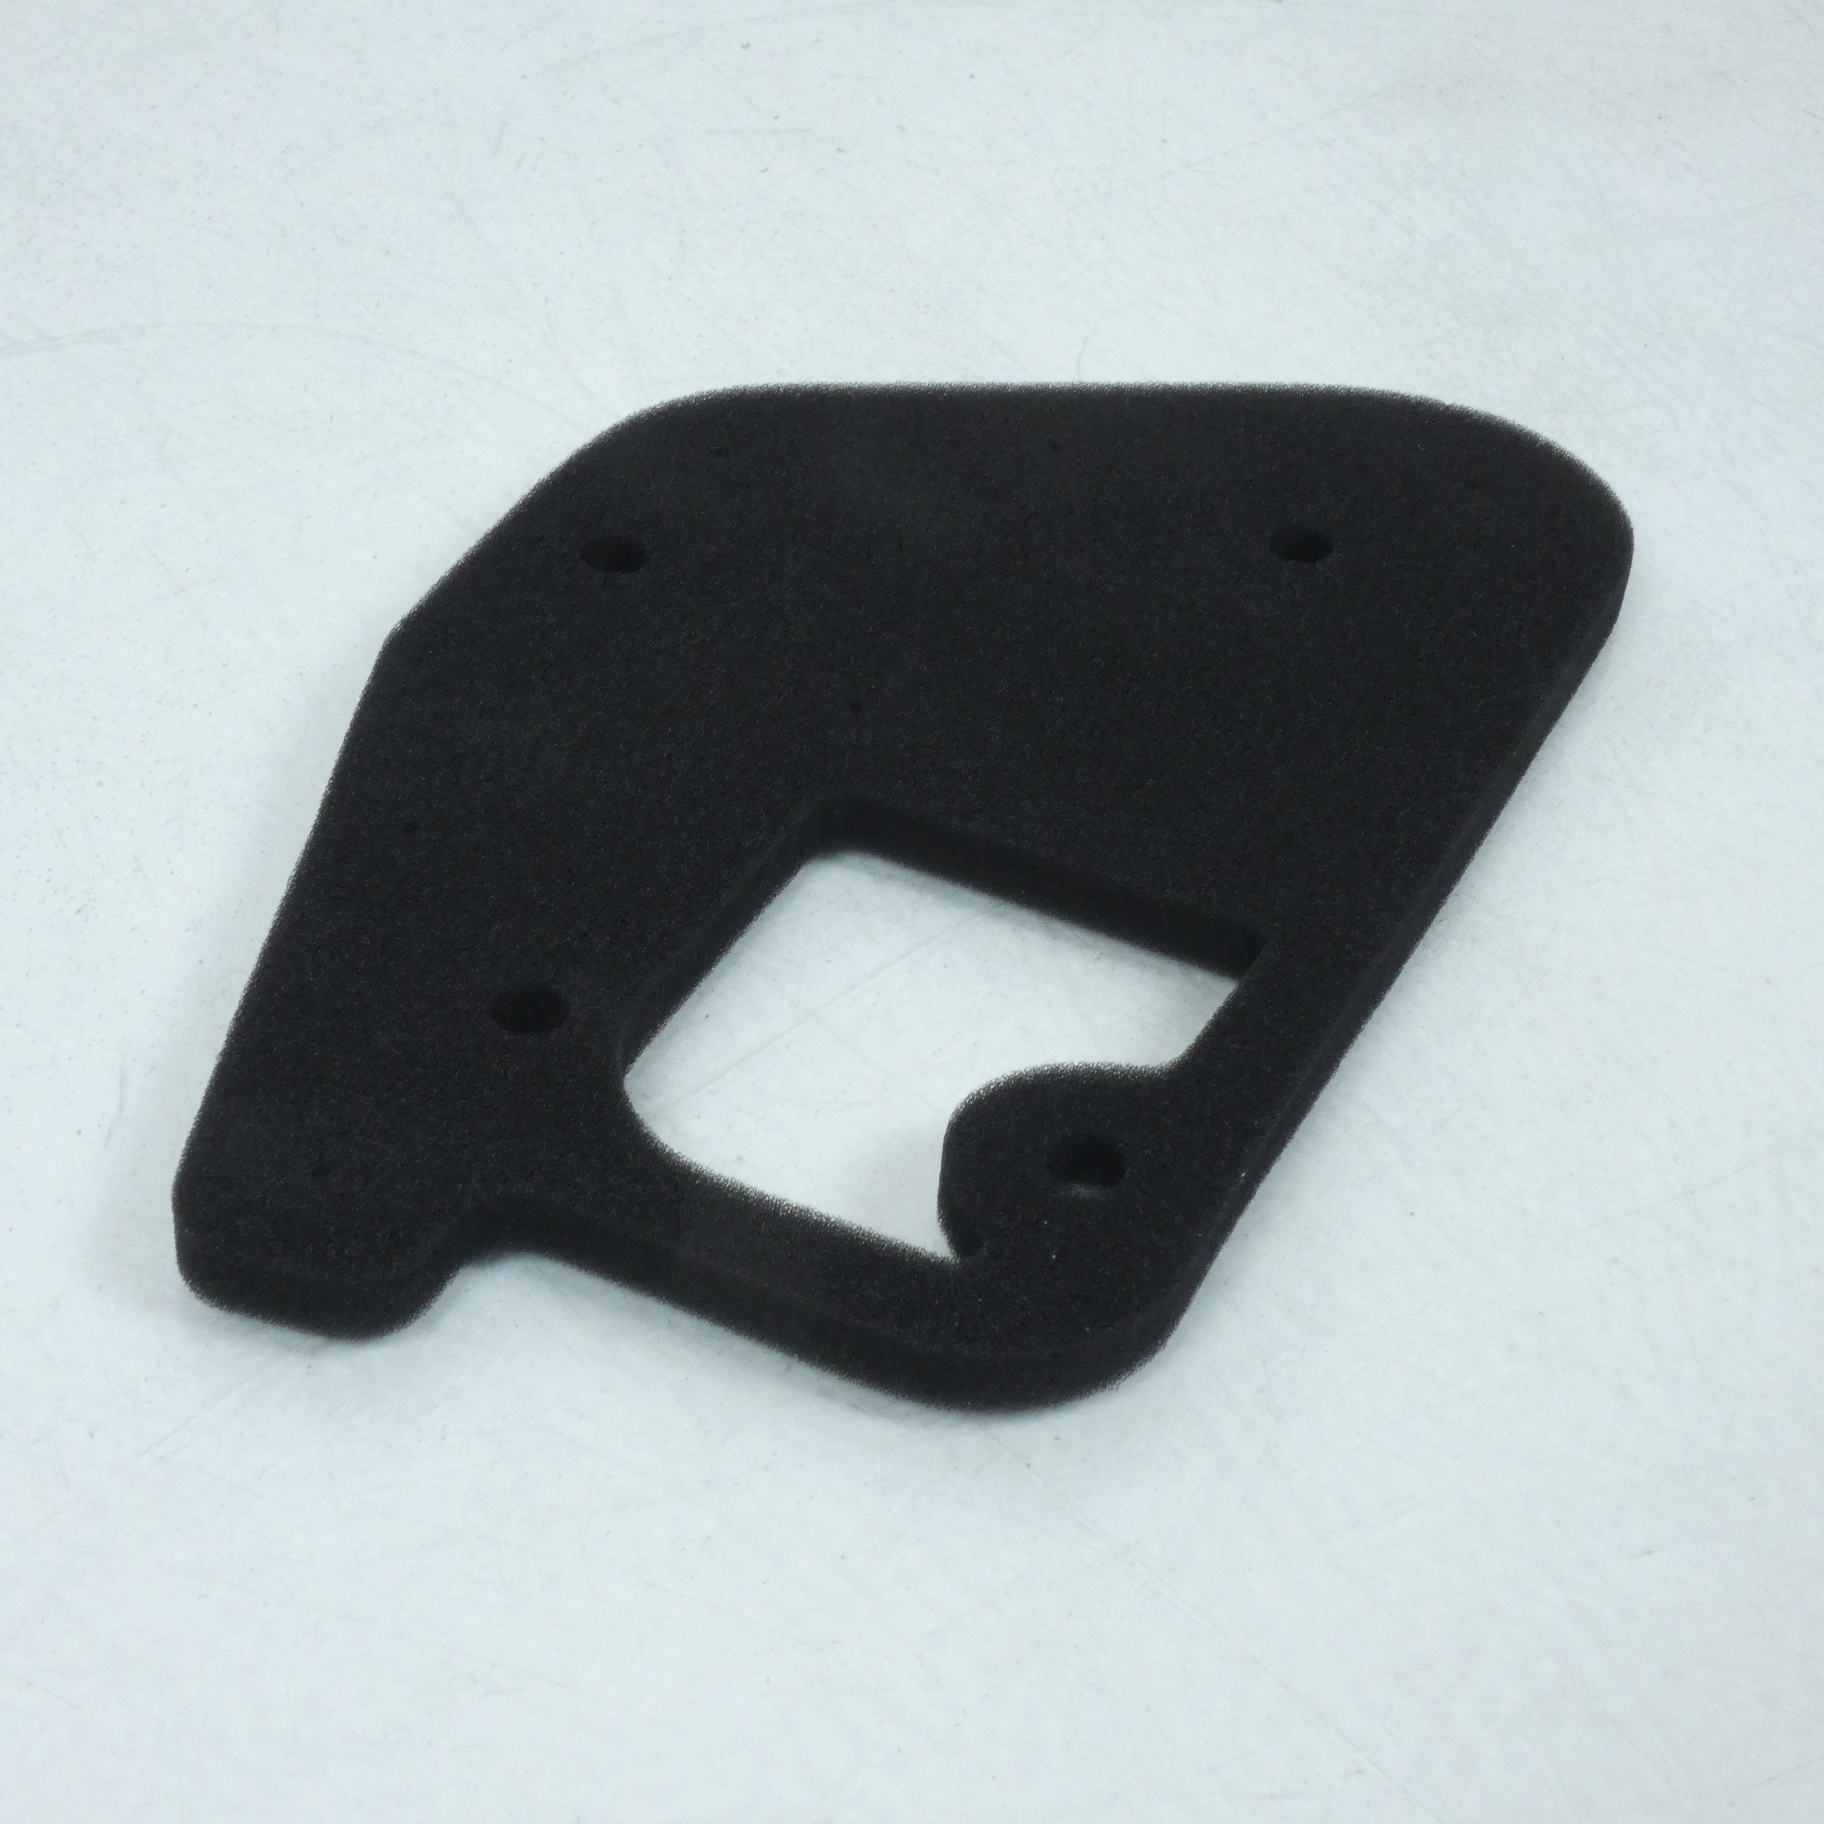 Filtre à air Sifam pour scooter Yamaha 50 BWS 1996-2016 Neuf